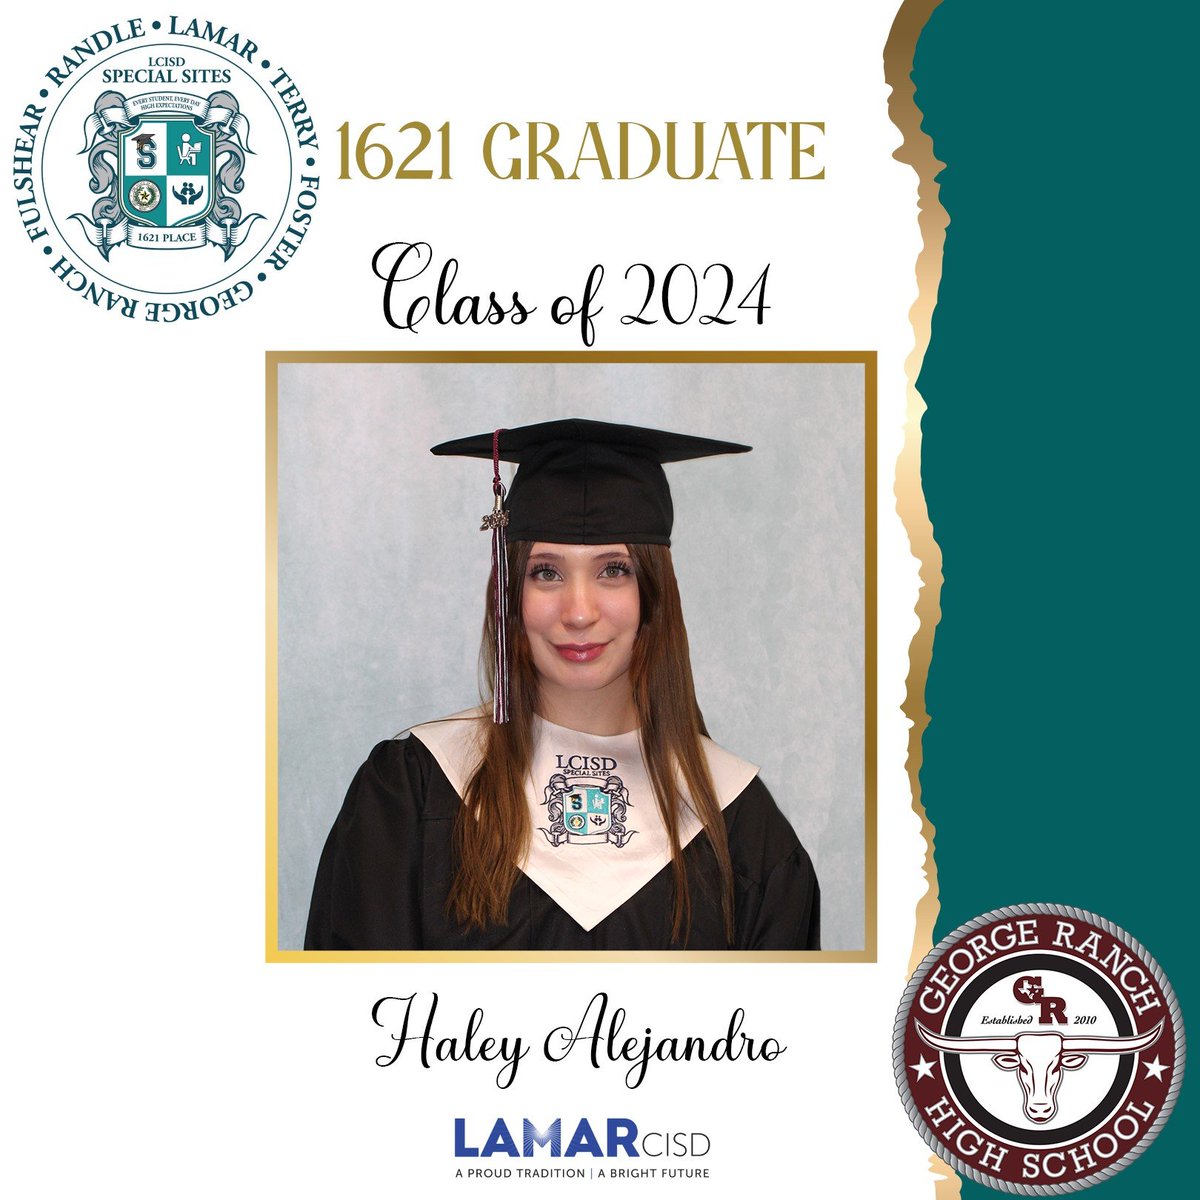 🎓Special Sites proudly congratulates Haley Alejandro on being a confirmed graduate of George Ranch High School! Your hard work & determination at 1621 Place, LCISD’s ONLY School of Choice, have paid off, making you an official LCISD Graduate! Best wishes! #1621Place @GRHSNews